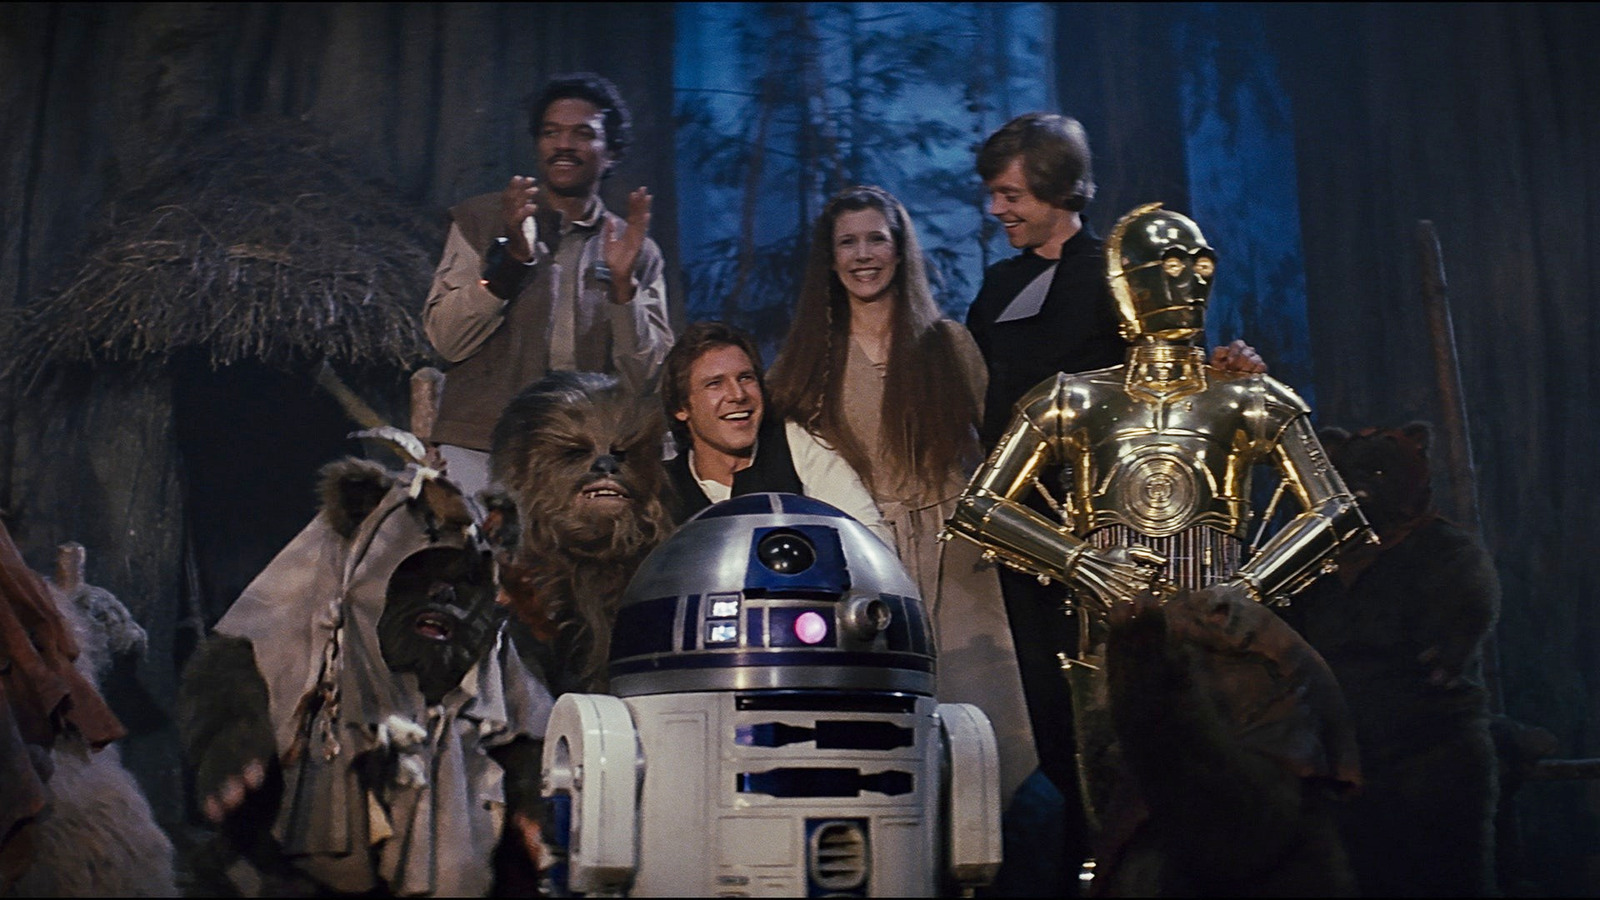 The Return of the Jedi Victory Celebration Is the Best Change Lucas Made to the Original Trilogy